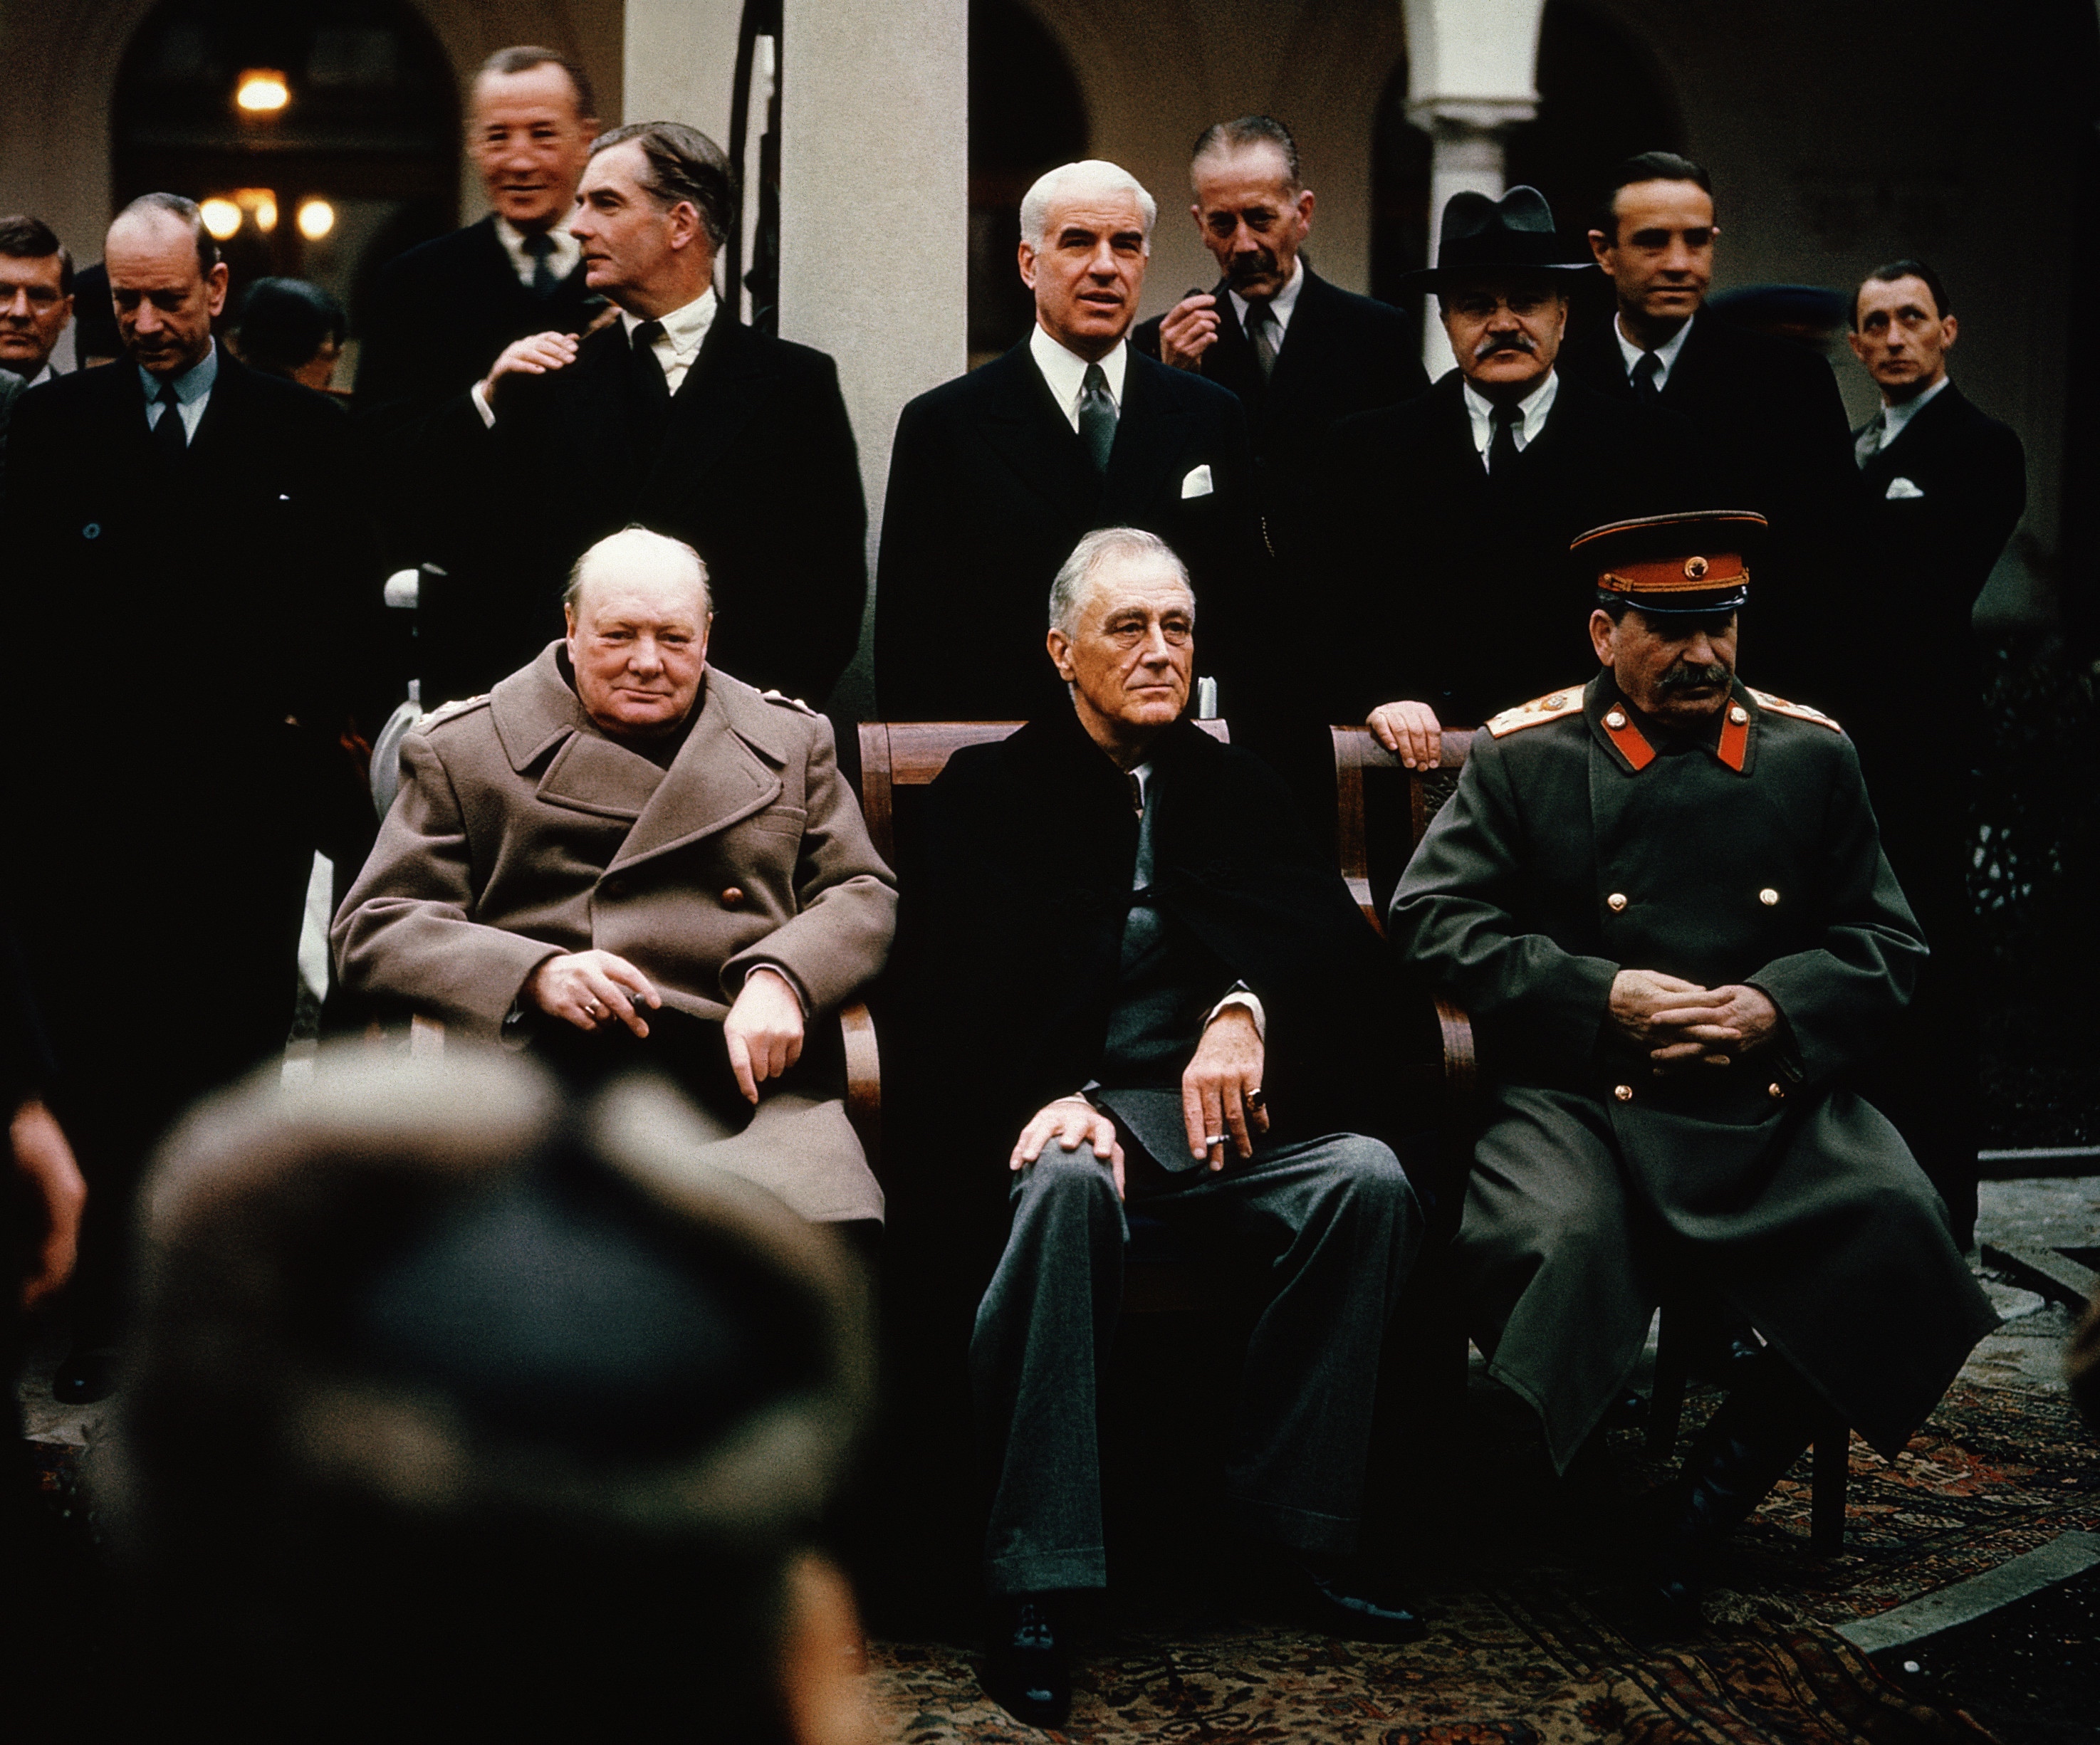 World Leaders Stalin, Roosevelt and Churchill at the Yalta Conference, 1945